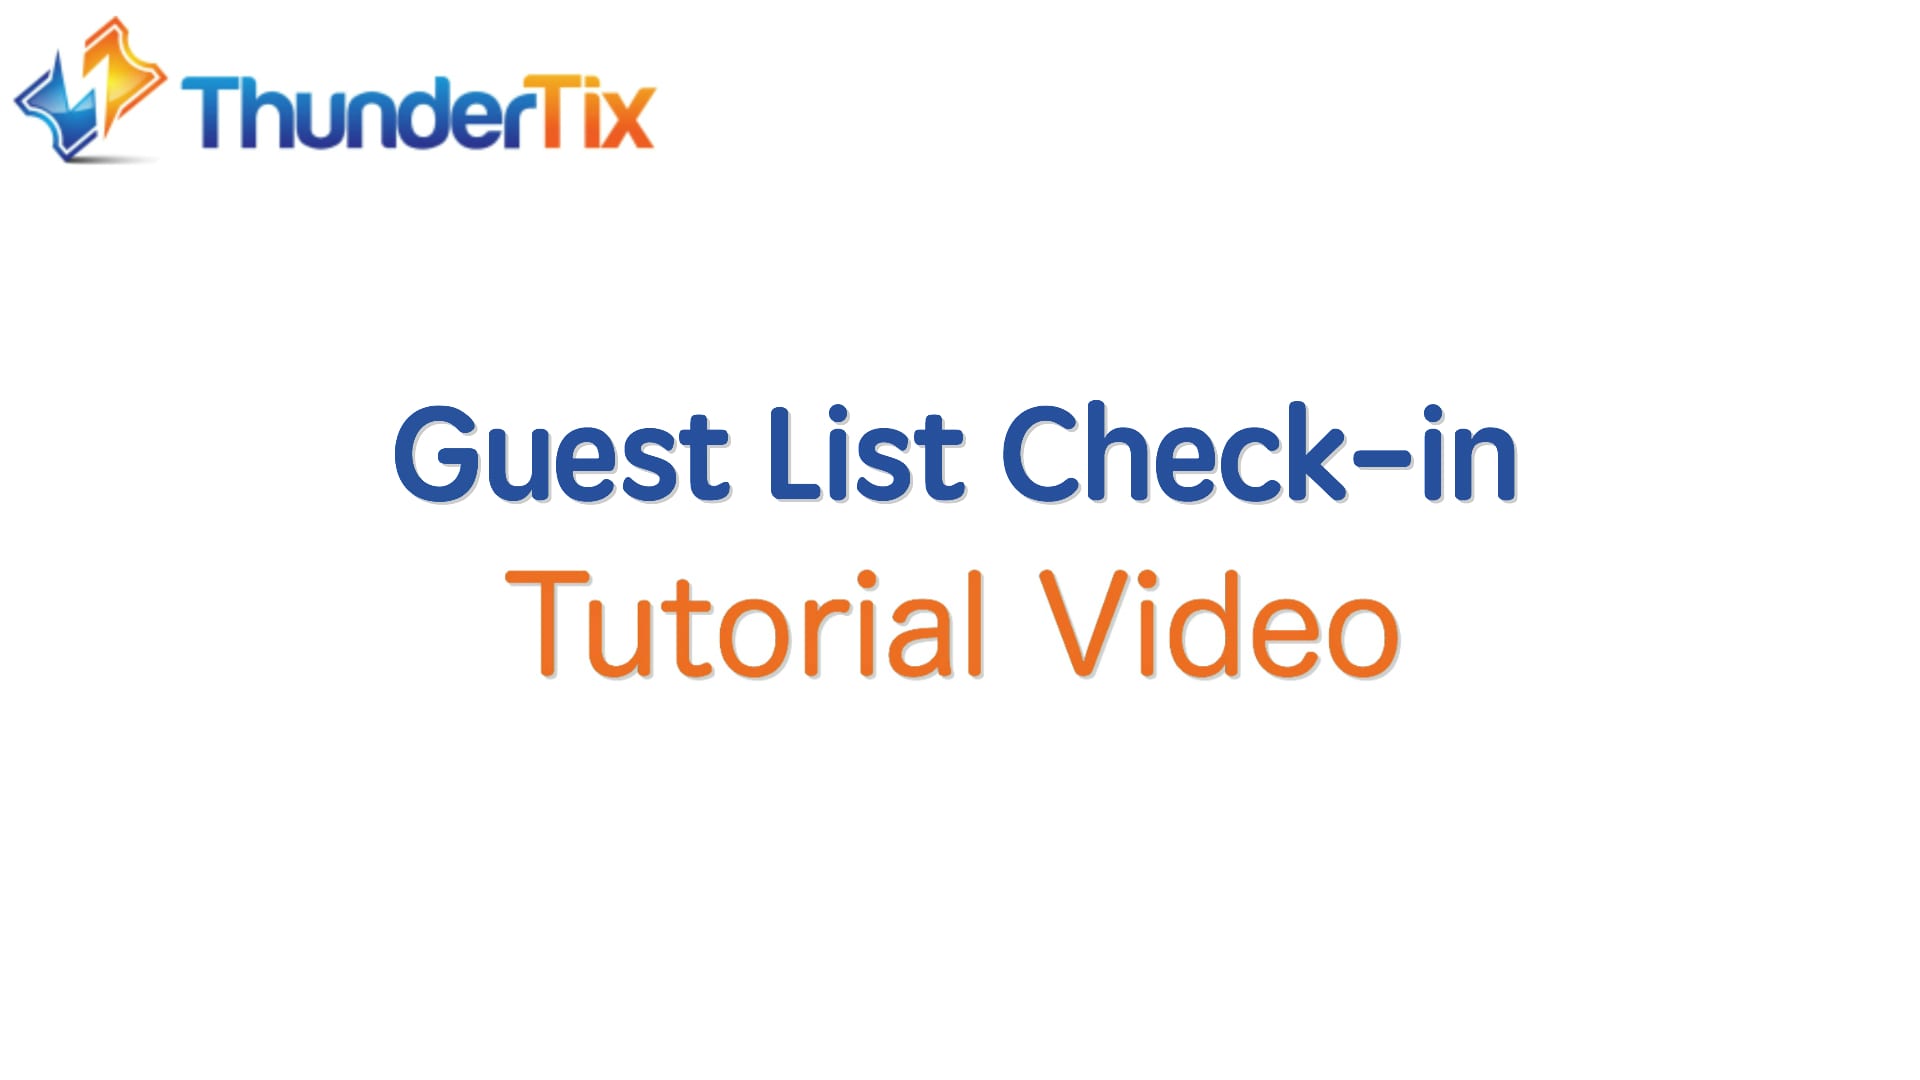 Guest List Check-in Tutorial Video